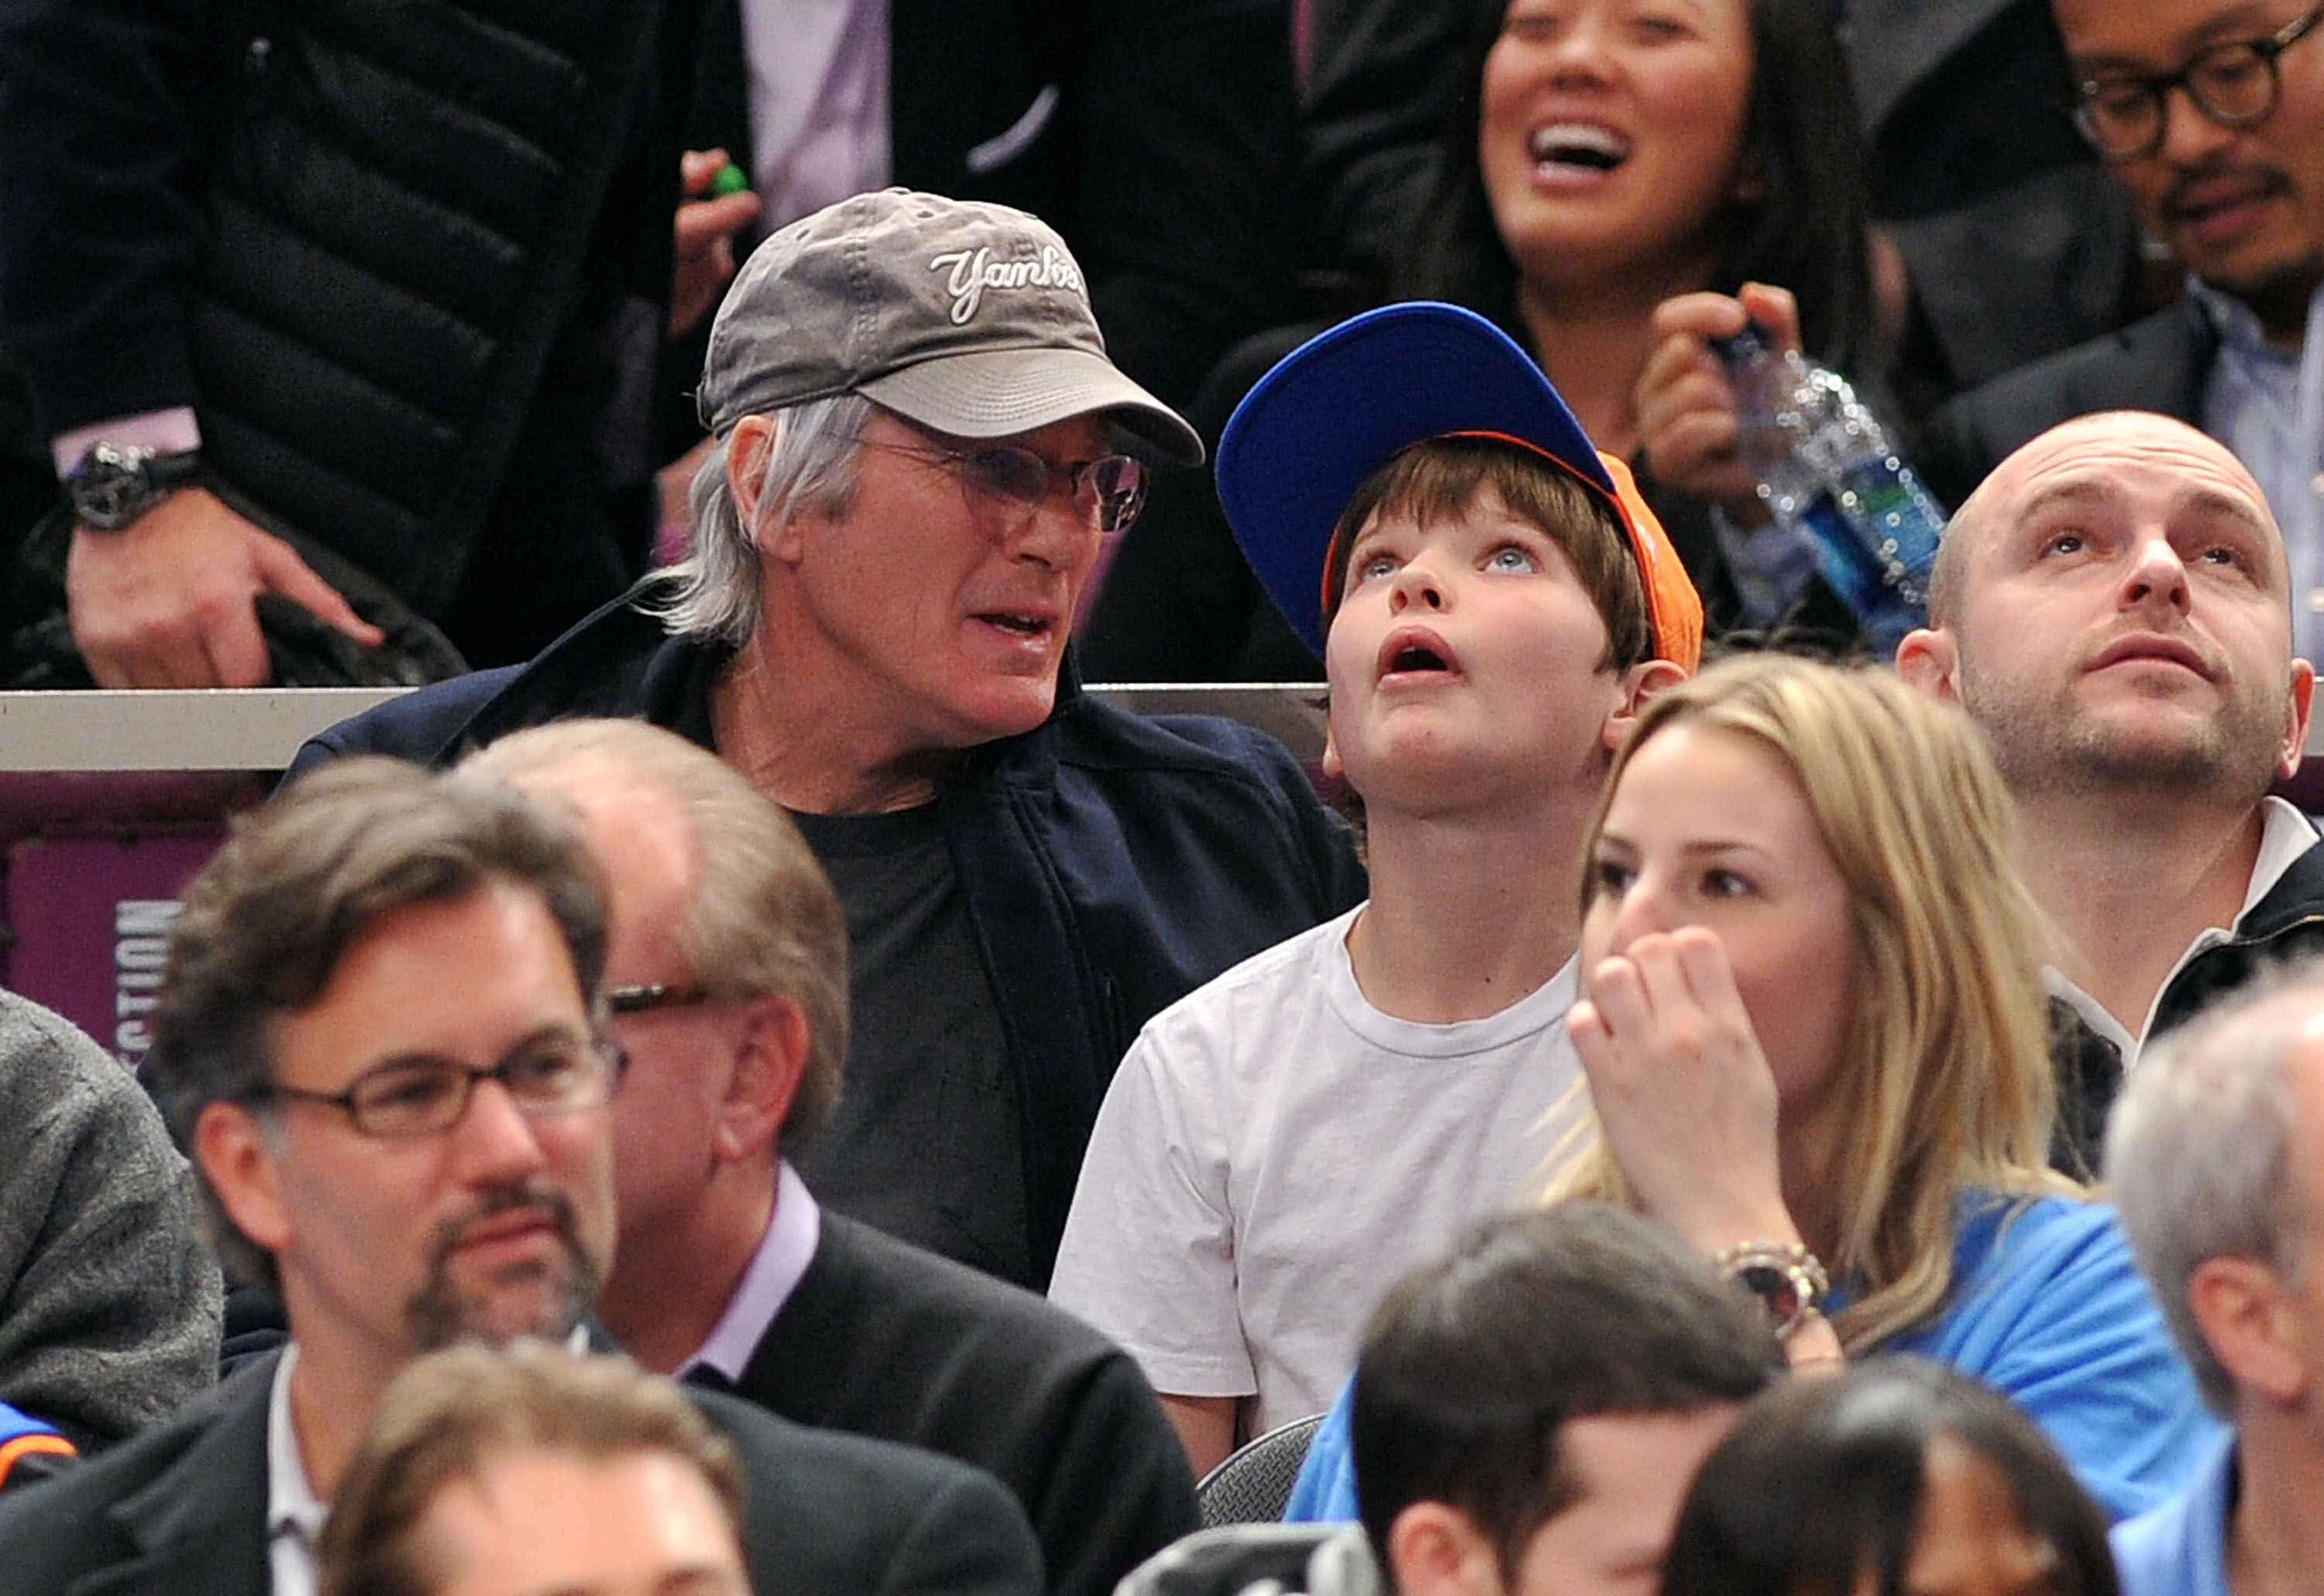 Richard Gere and Homer James Jigme Gere at a Utah Jazz vs New York Knicks game in New York City on March 7, 2011. | Source: Getty Images